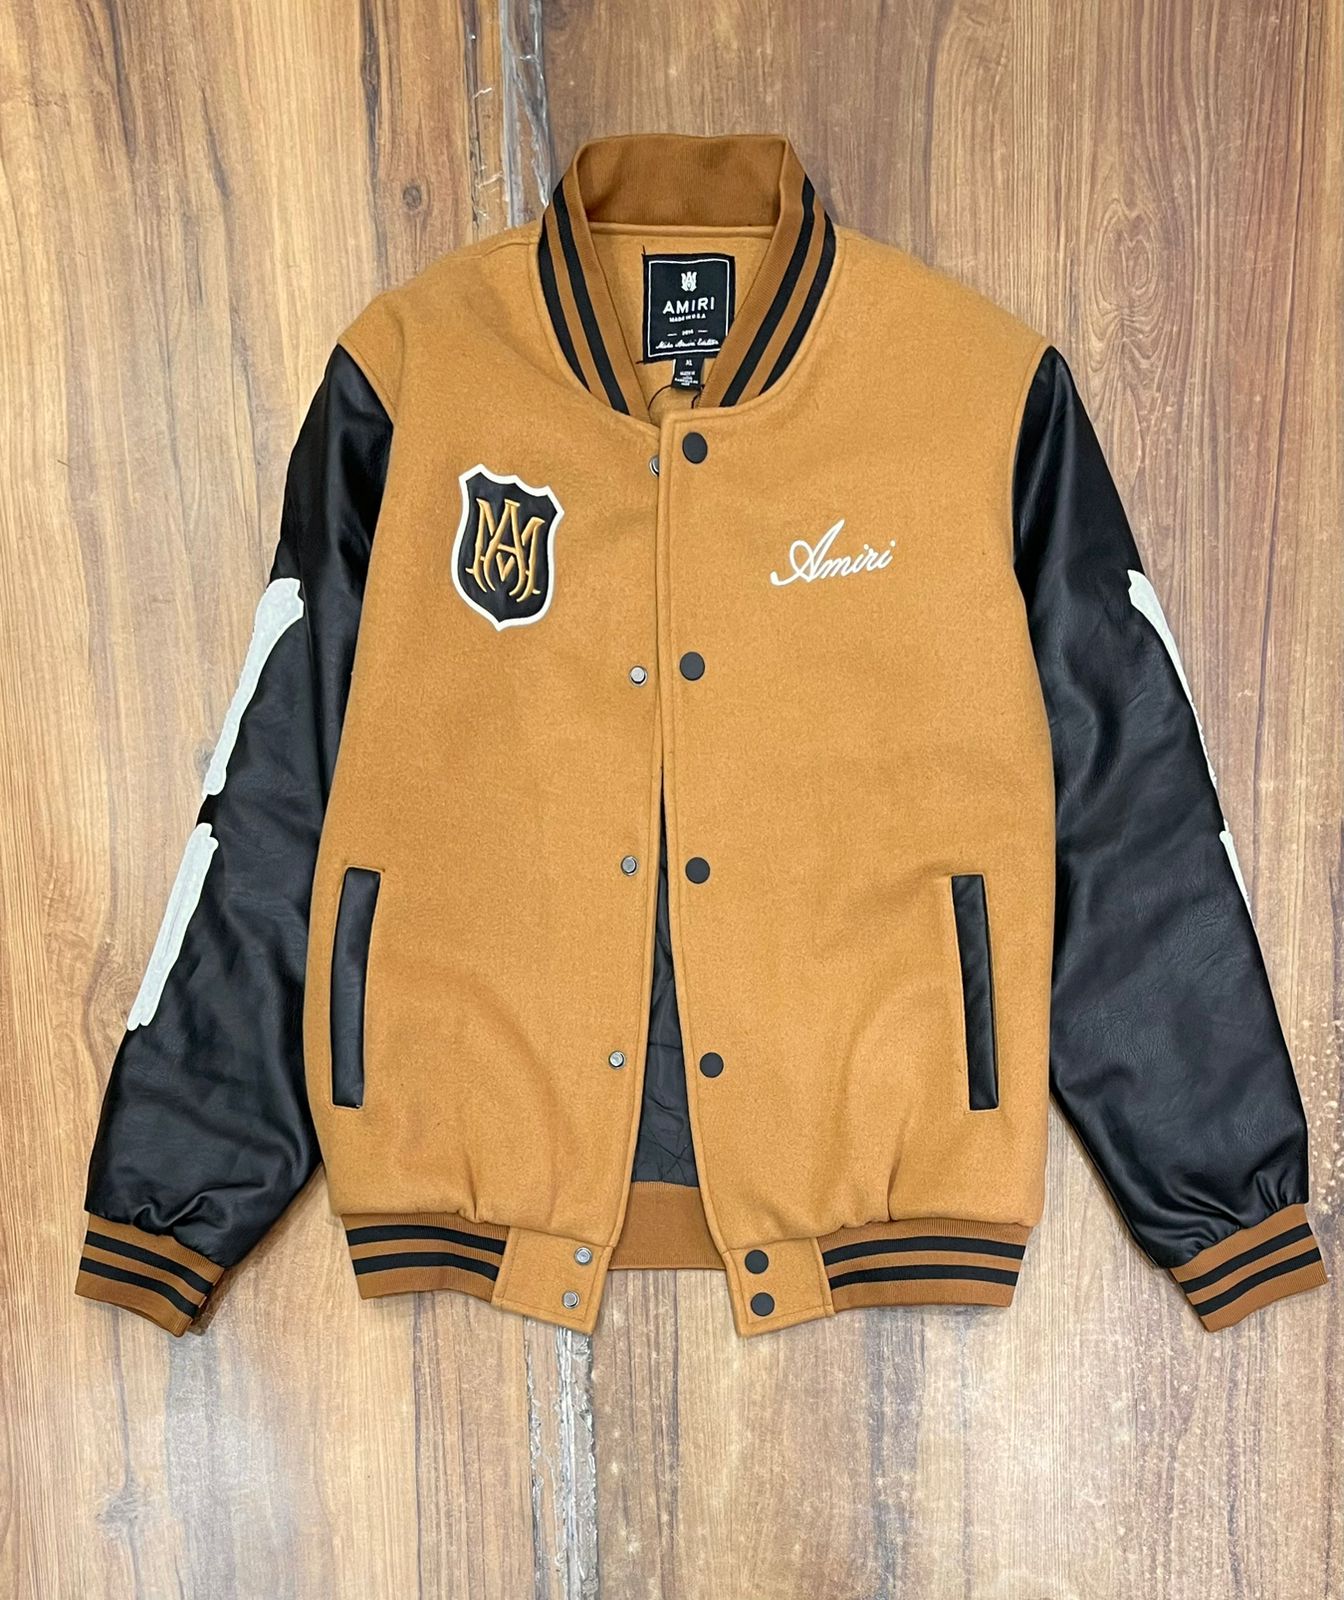 LUXURY WINTER HIGH END QUALITY VARSITY JACKETS FOR MEN